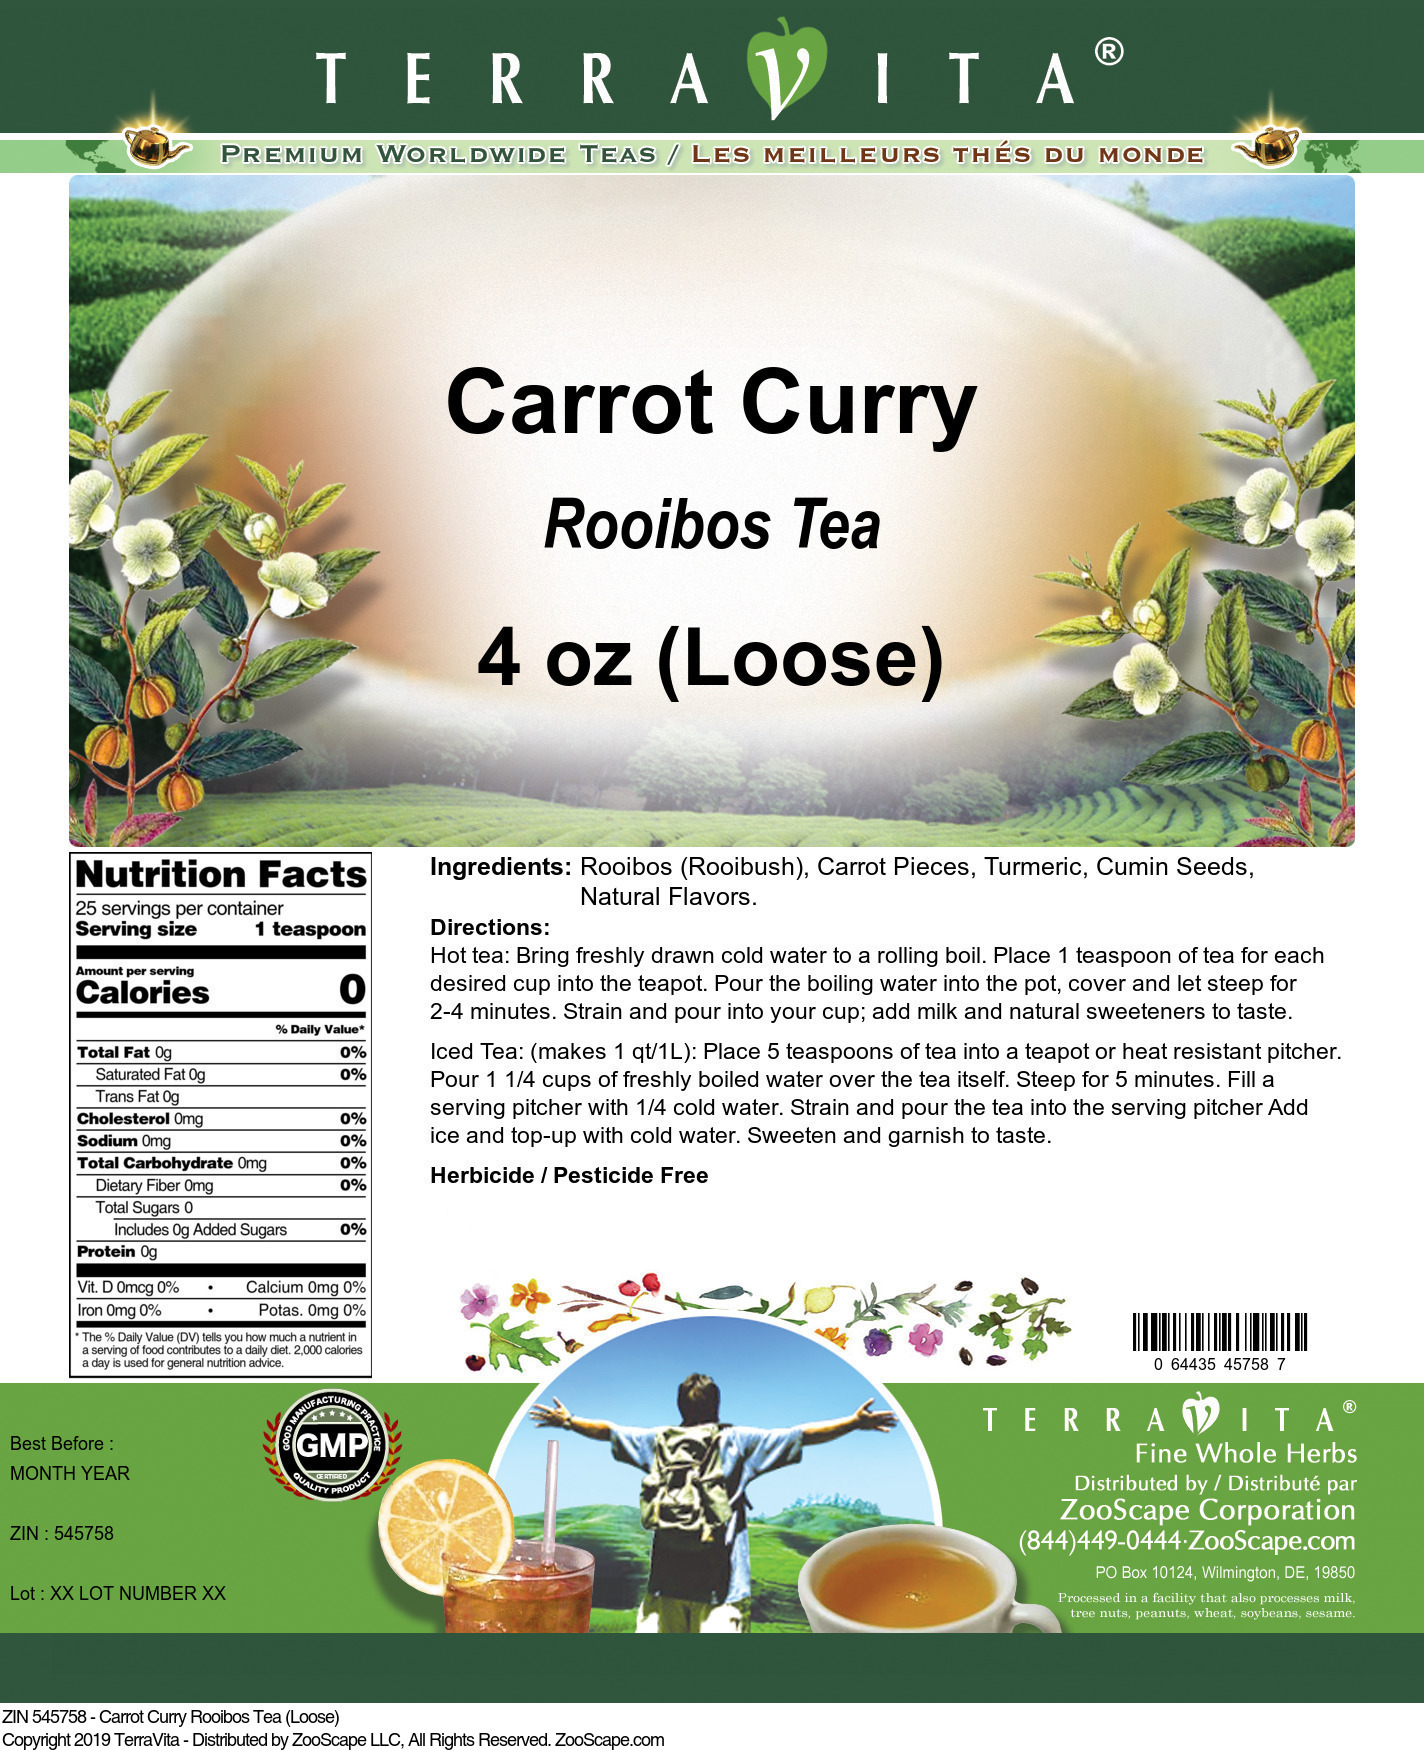 Carrot Curry Rooibos Tea (Loose) - Label